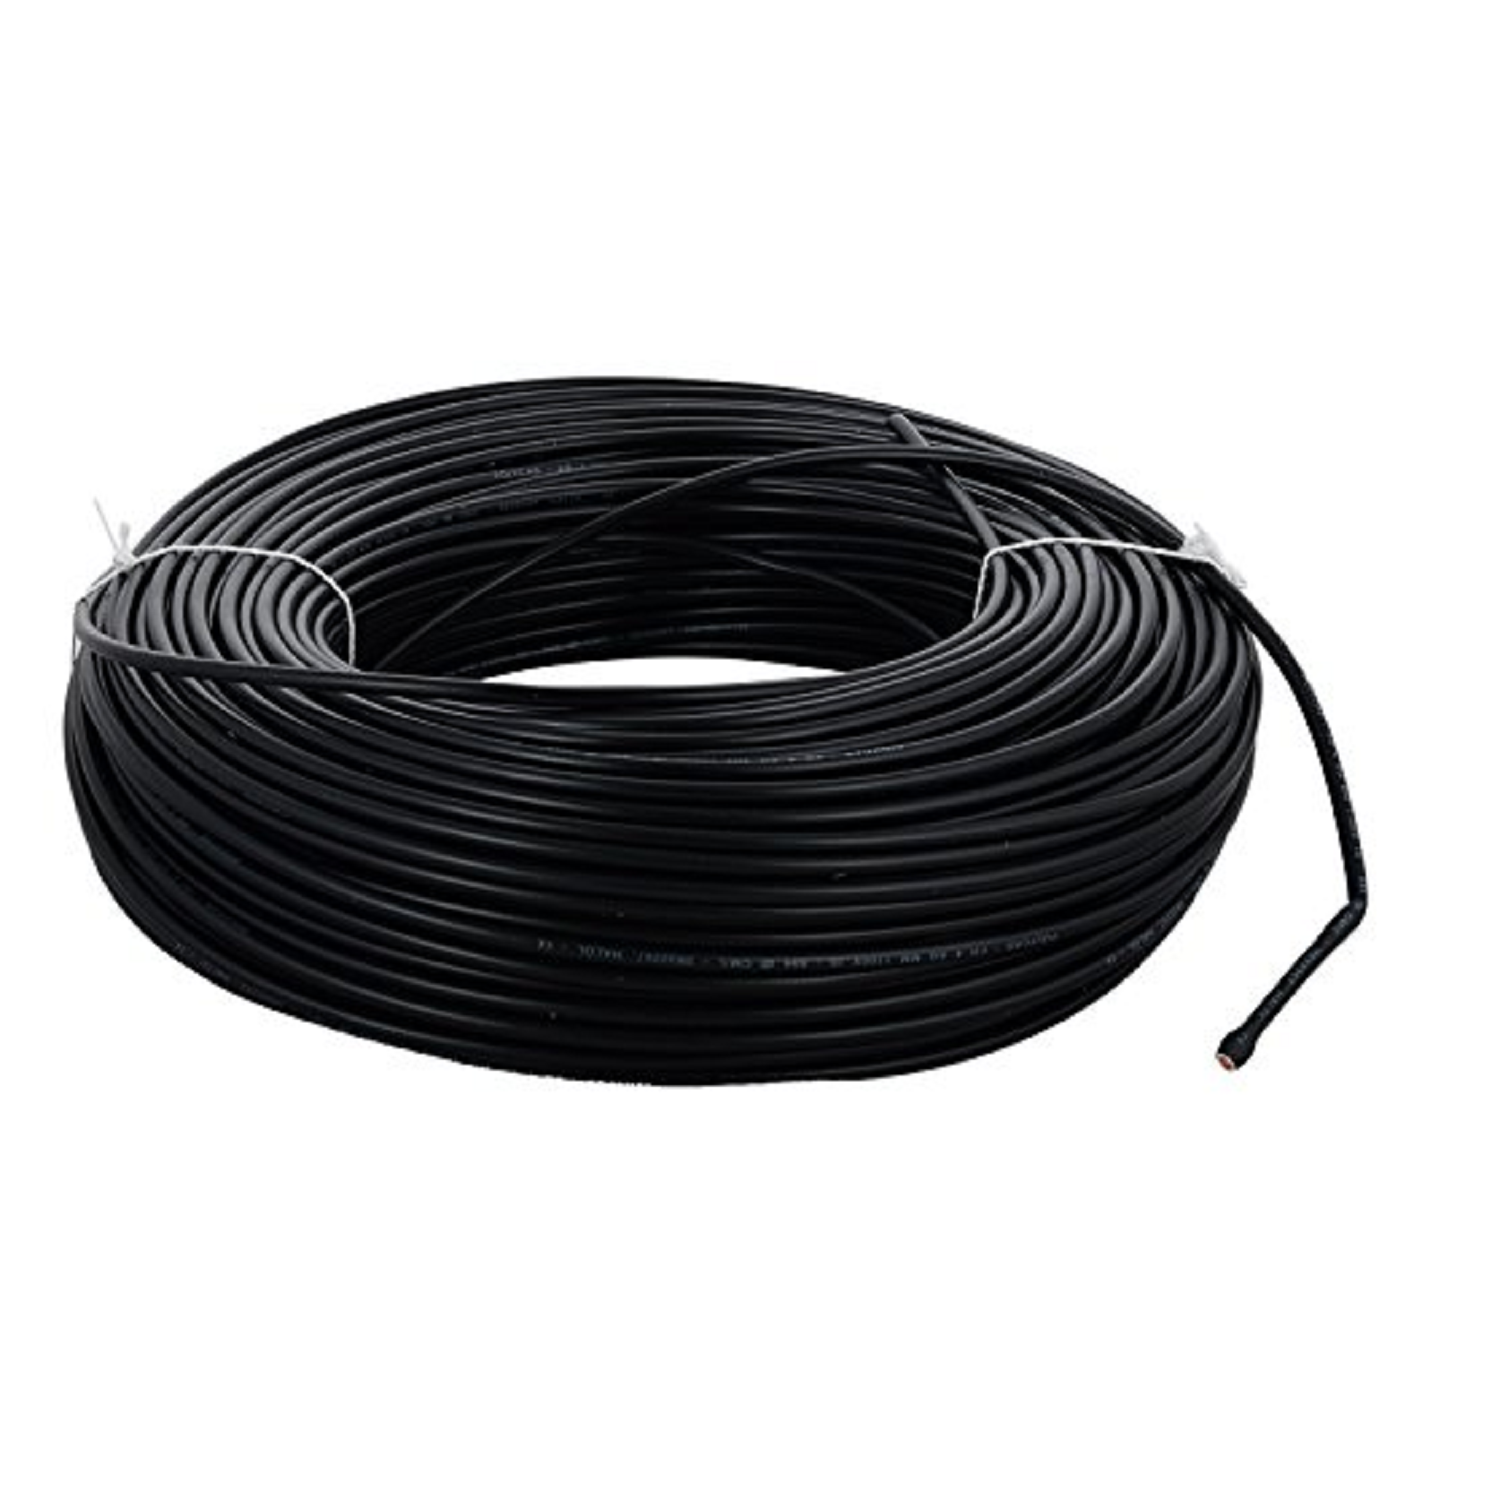 Polycab FR-LS 1.5 SQ-MM, (300 Meters) PVC Insulated Copper Wire Single Core (Black)